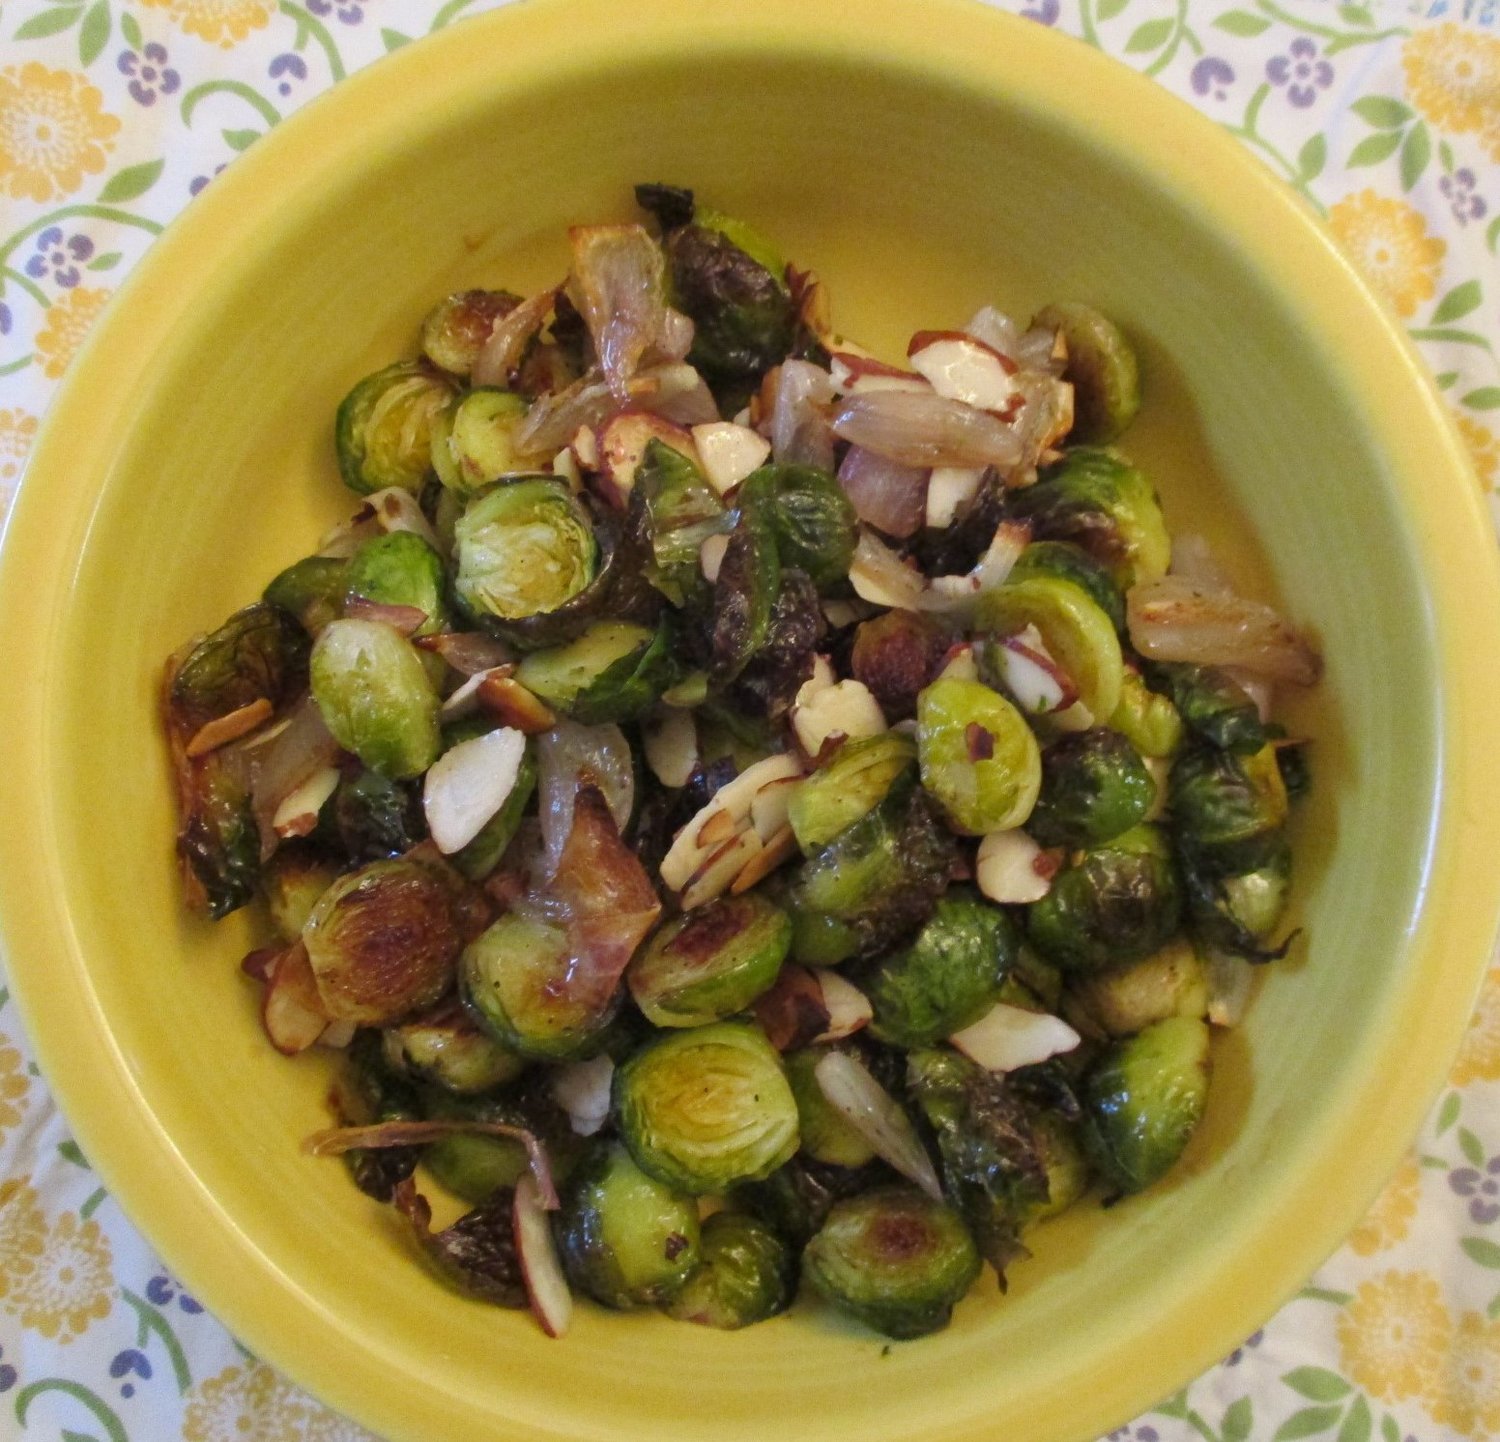 Oven-roasted Brussels sprouts and shallots.